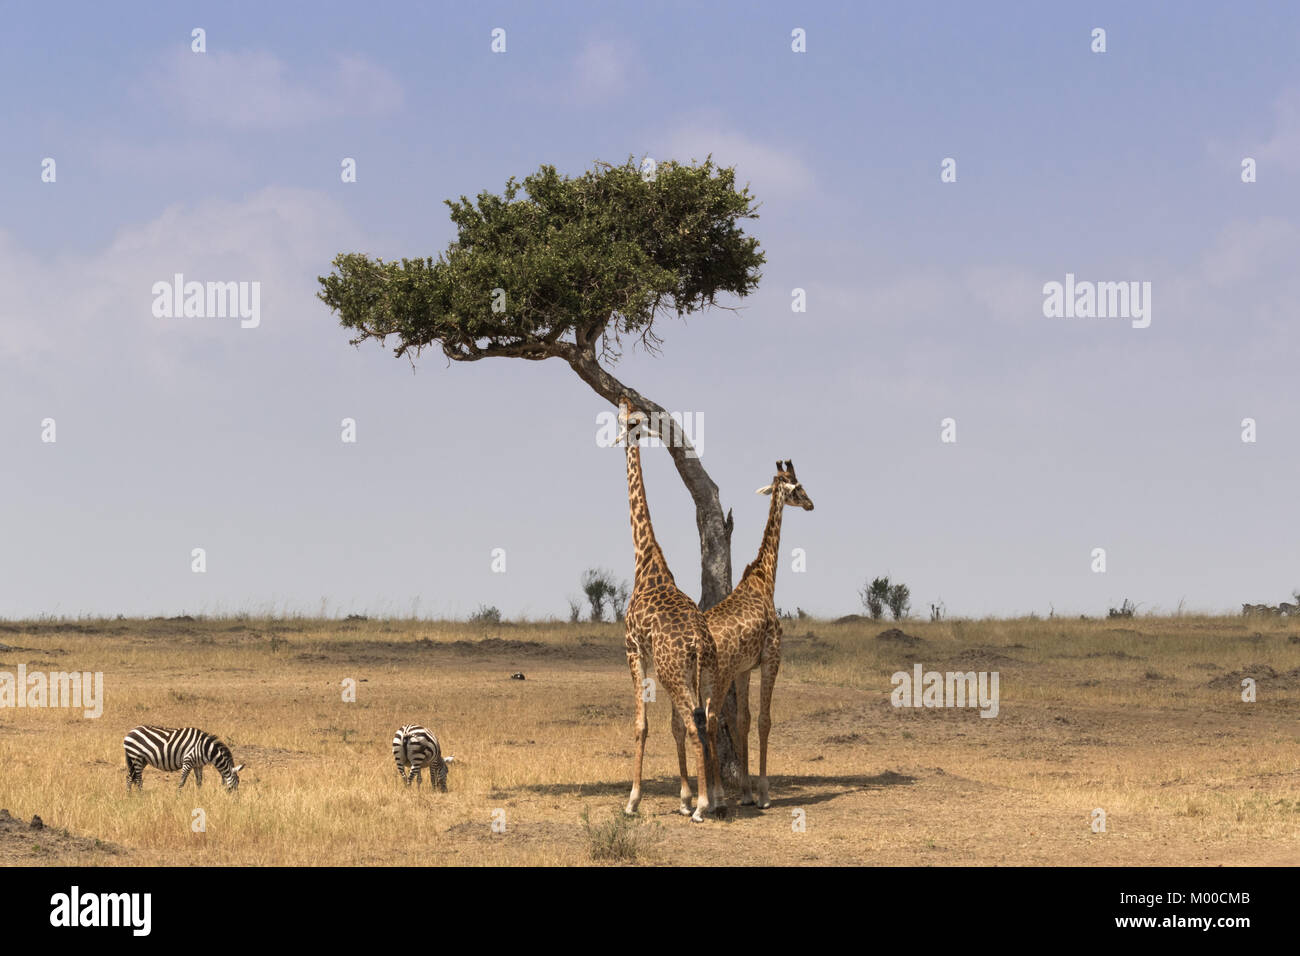 A masai giraffe reaches for acacia leaves, whilst another keeps watch and two plains zebras graze the savanna Stock Photo